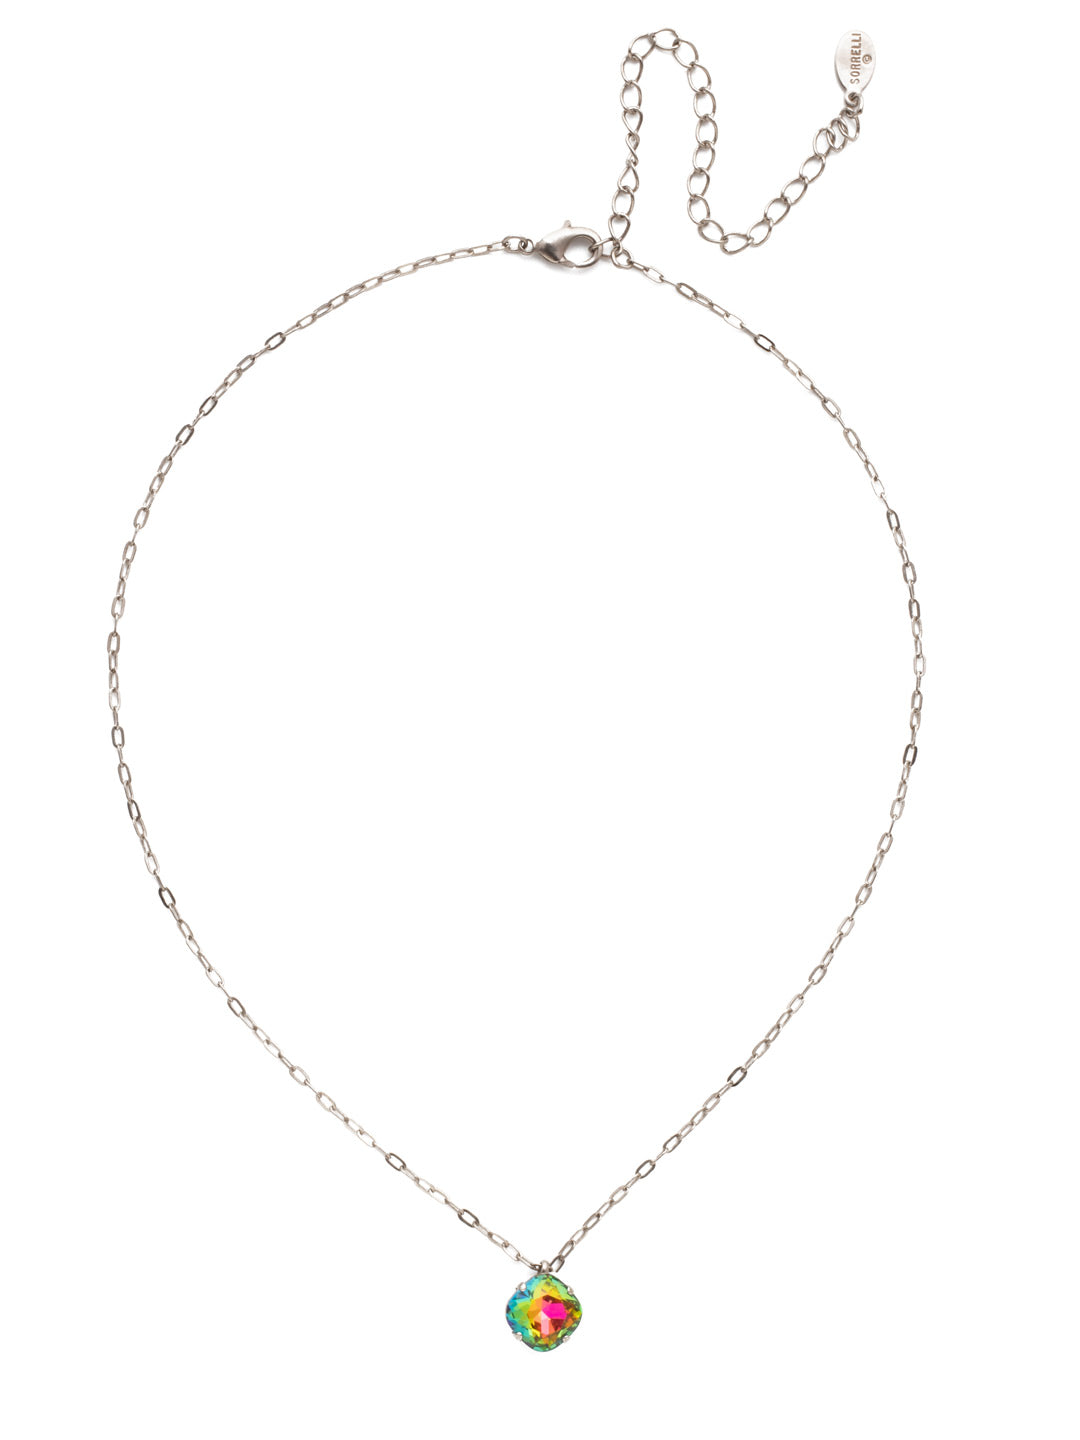 Siren Pendant Necklace - NEP22ASVO - With a cushion-cut crystal and delicate chain, the Siren Pendant  will add a litle sparkle to your everyday look. From Sorrelli's Volcano collection in our Antique Silver-tone finish.